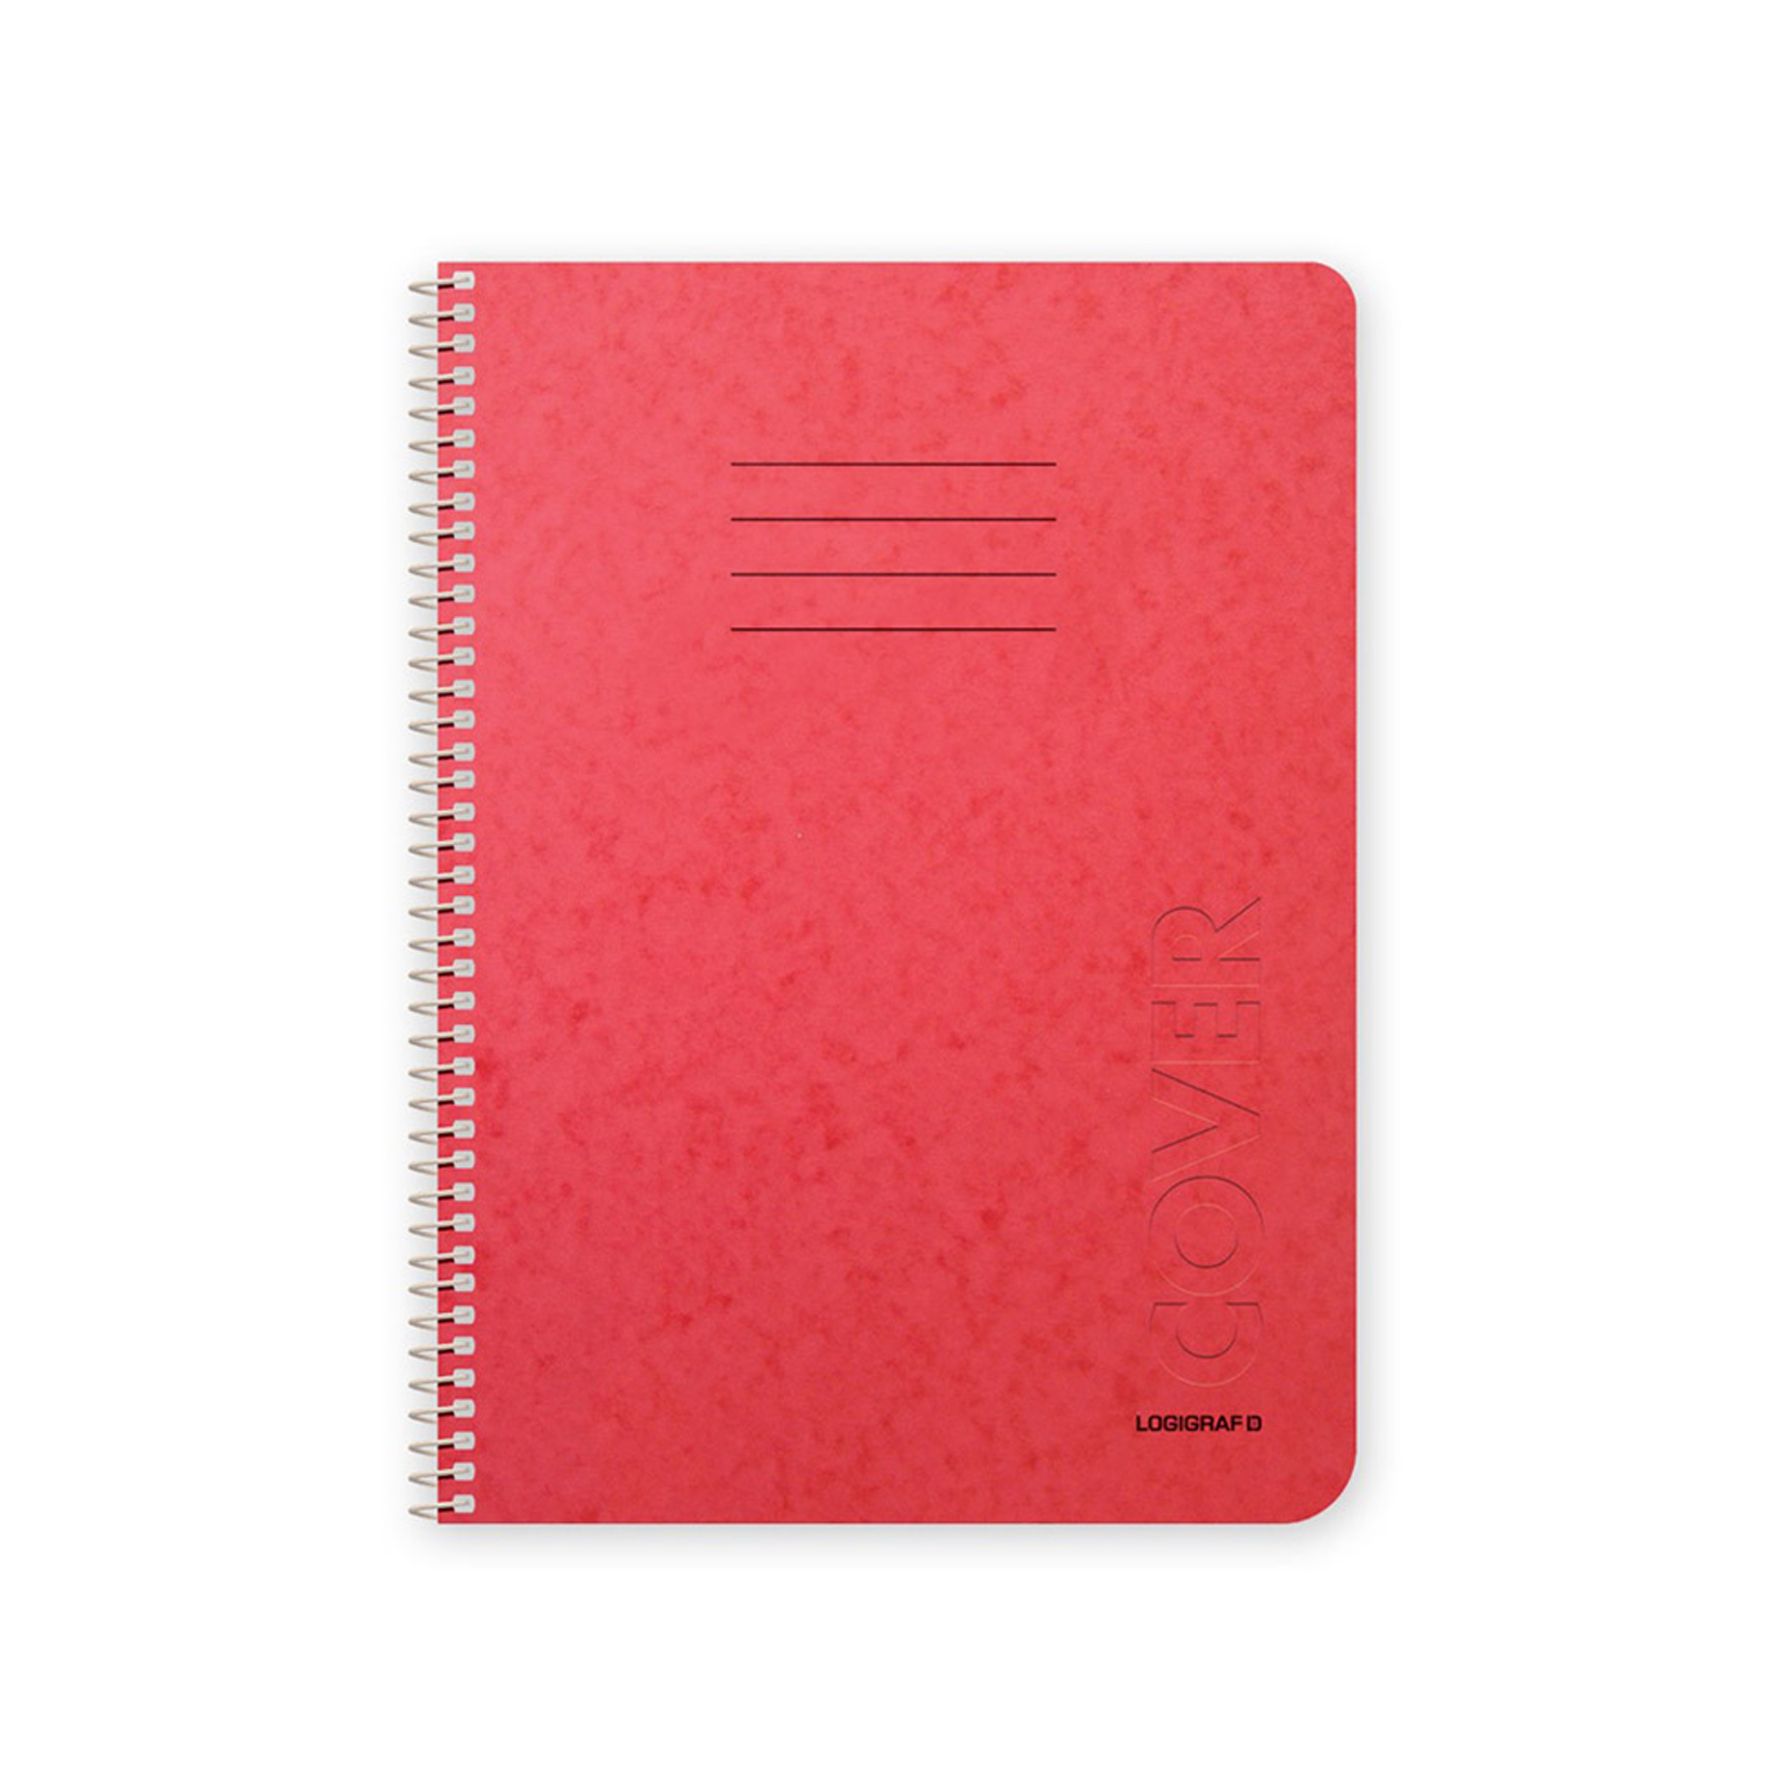 COVER Wirelock Notebook A4/21Χ29 4 Subjects 120 Sheets 6pcs 10 colors